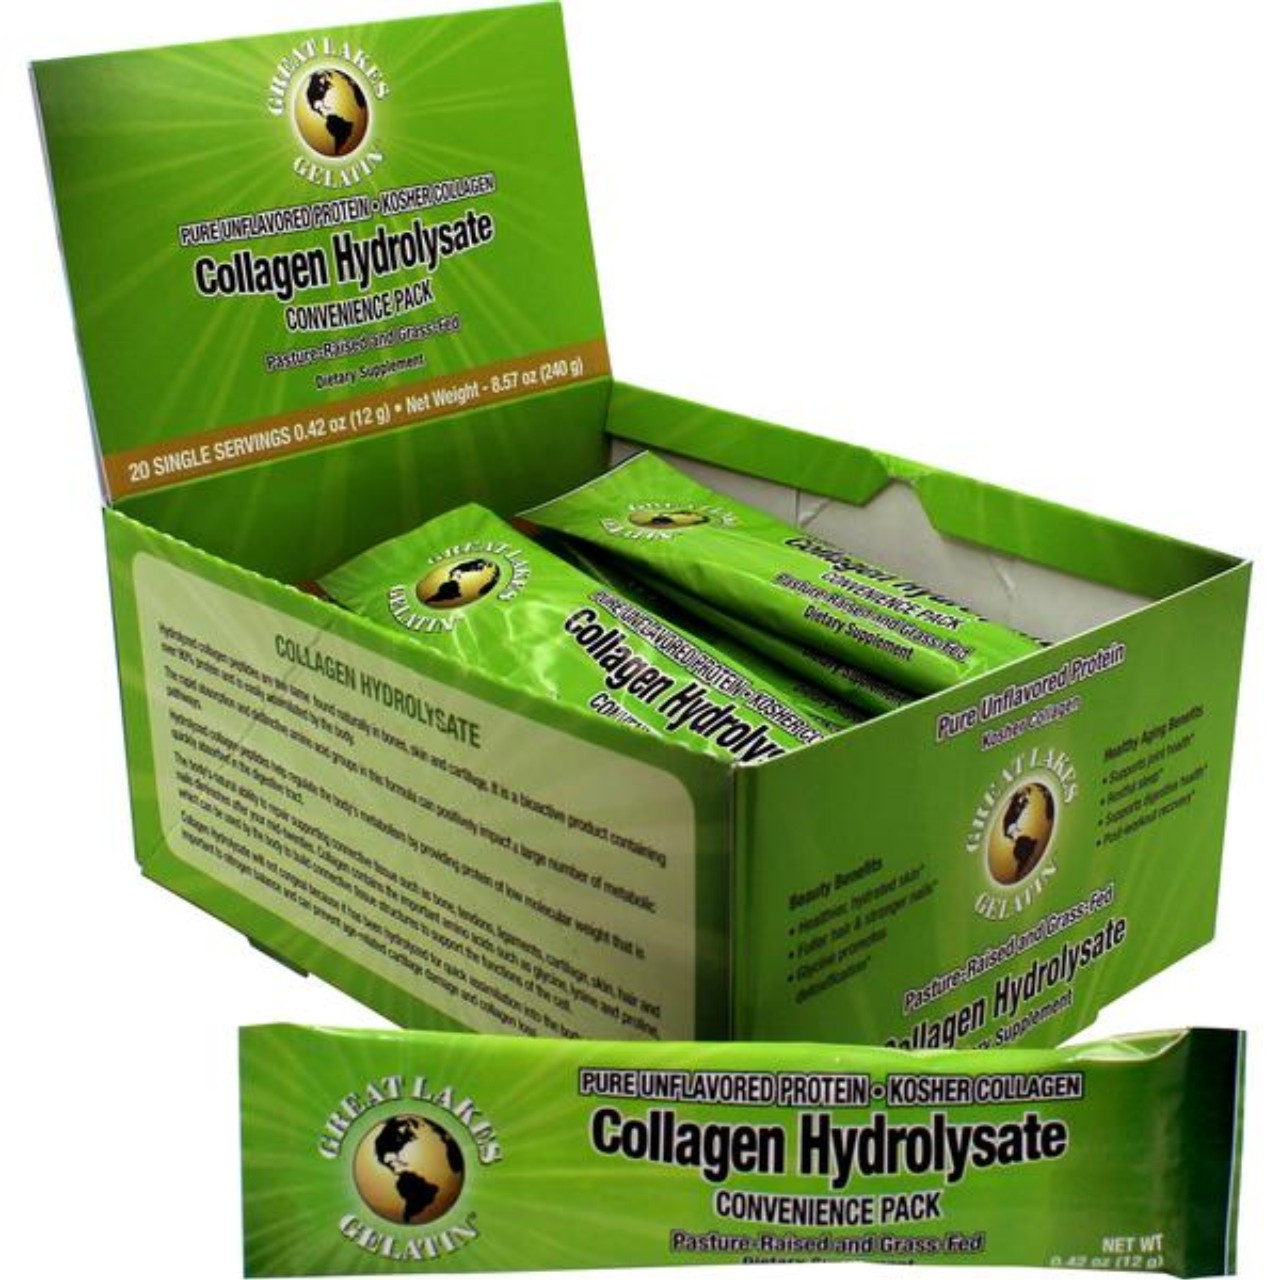 collagen-hydrolysate-convenience-packets-20-count-1280-x-1280-56947.jpg